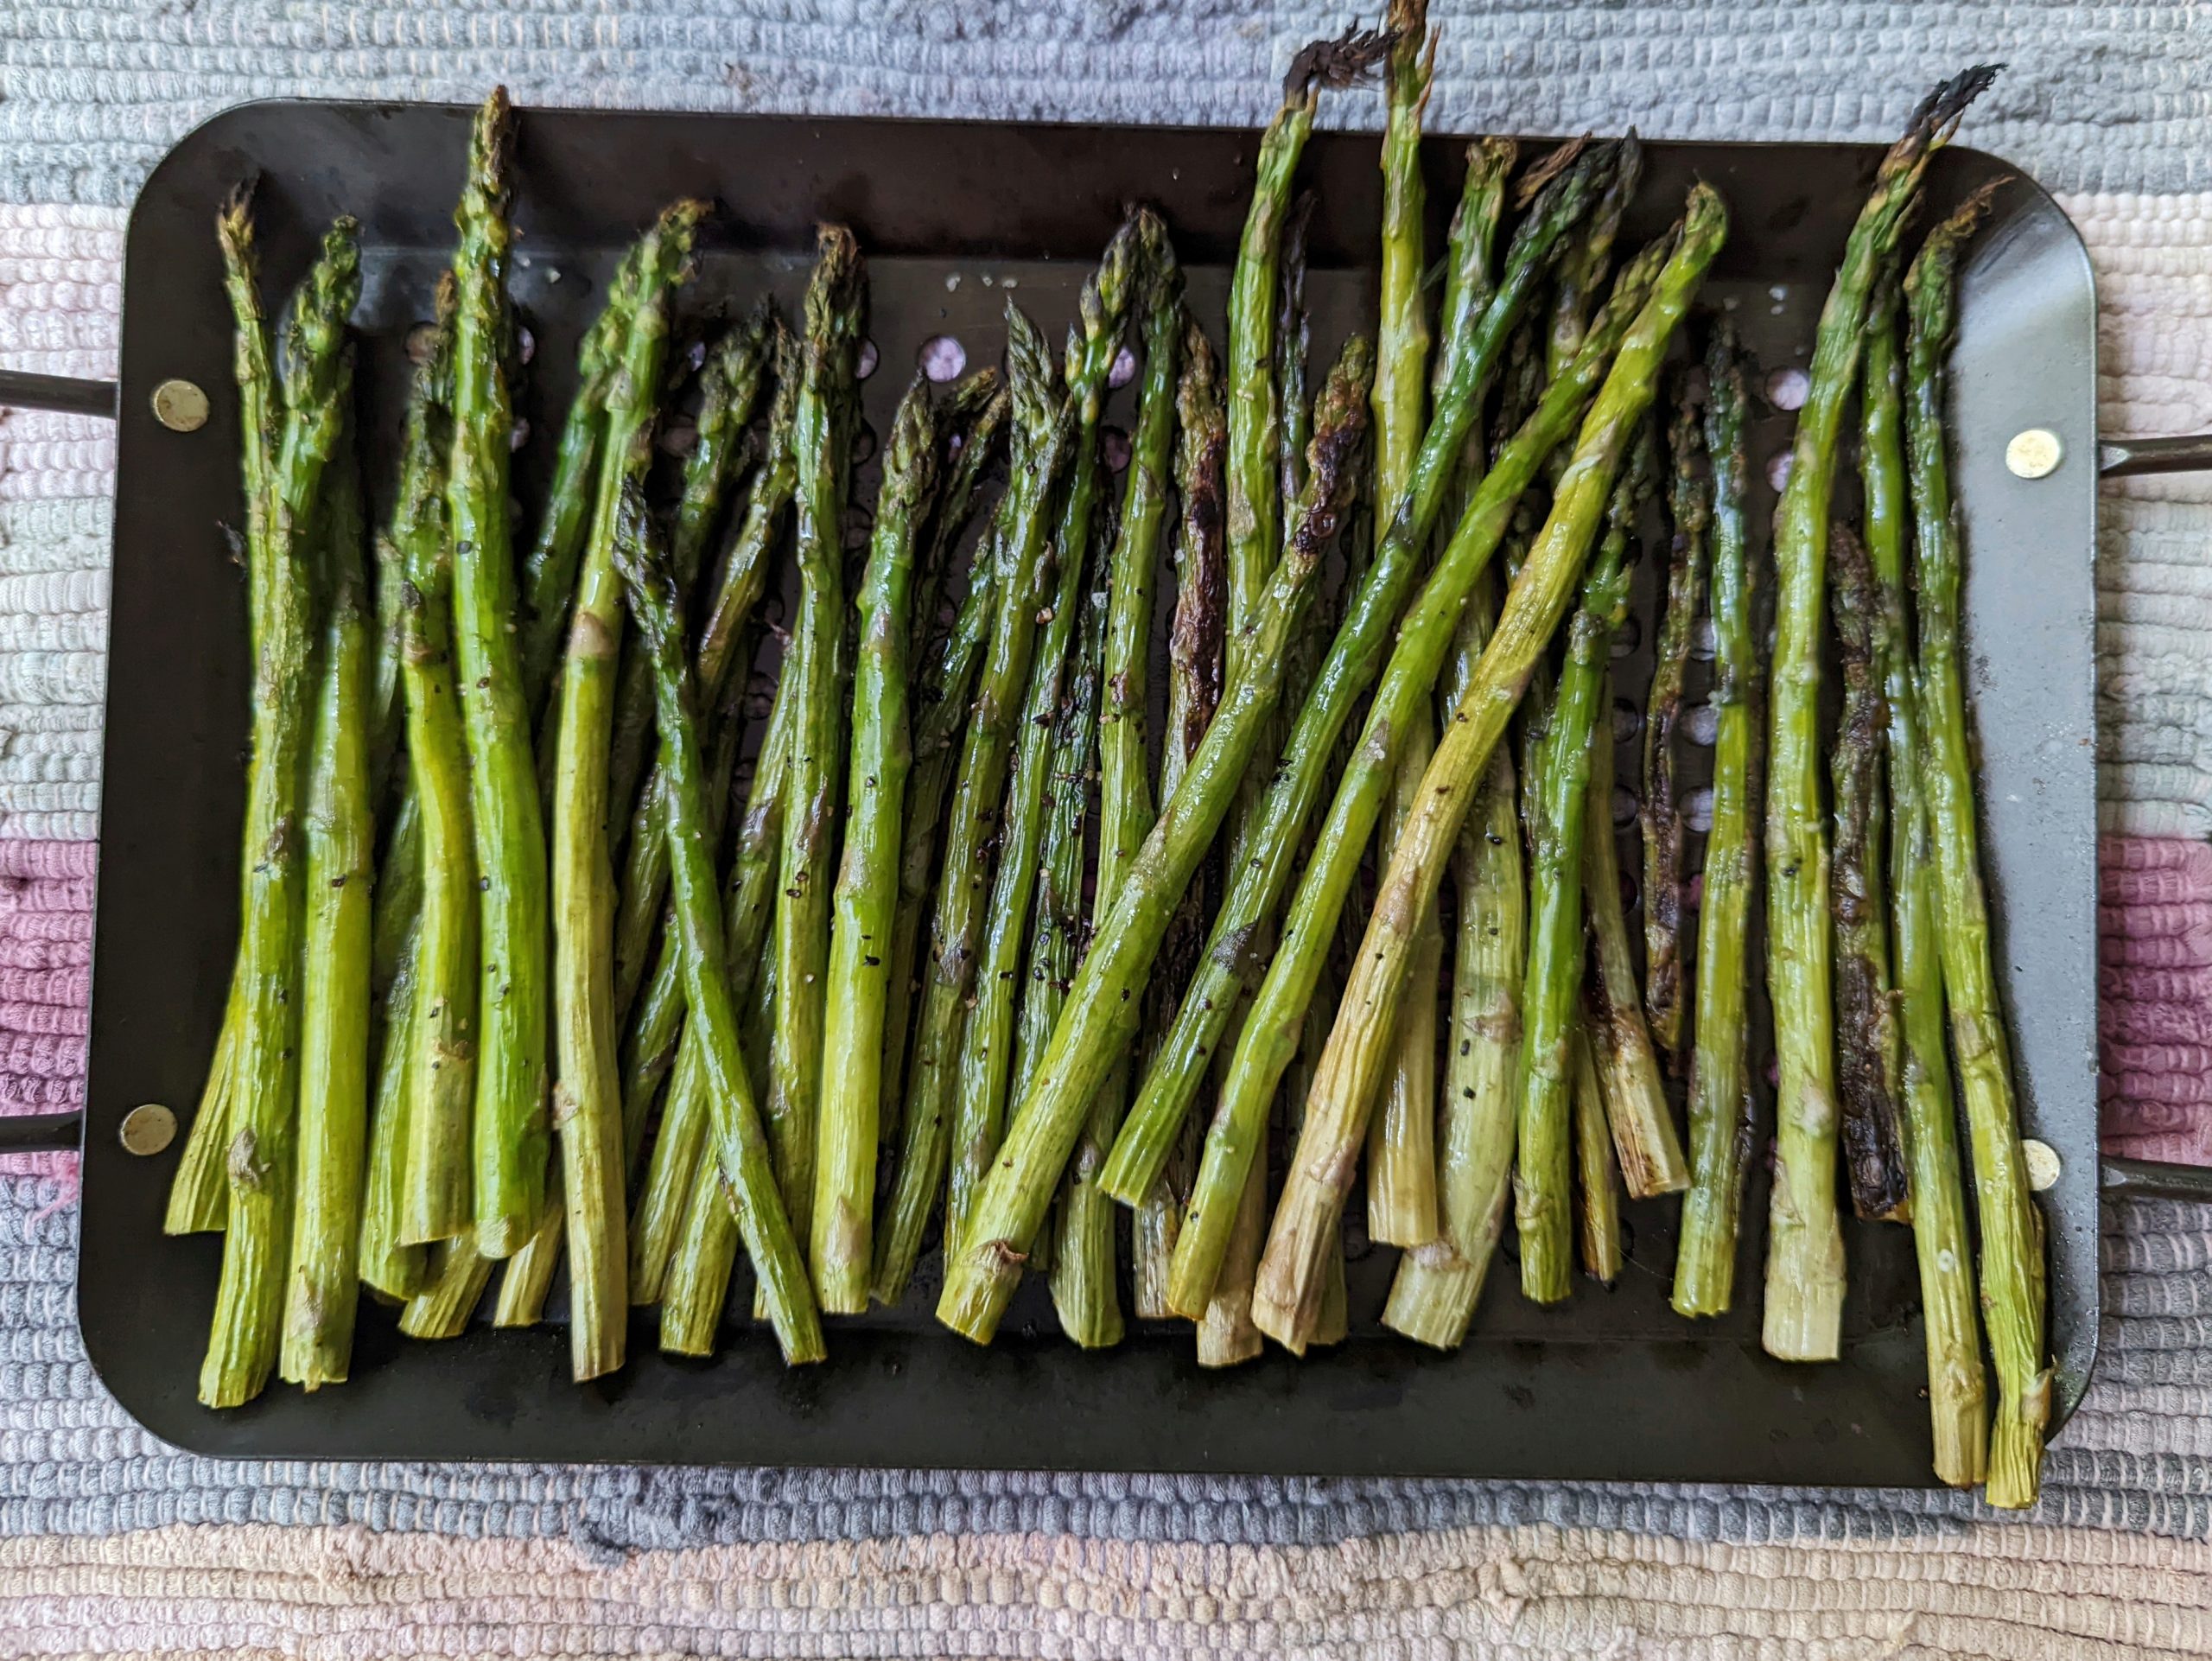 Grilled asparagus is ready to be served.